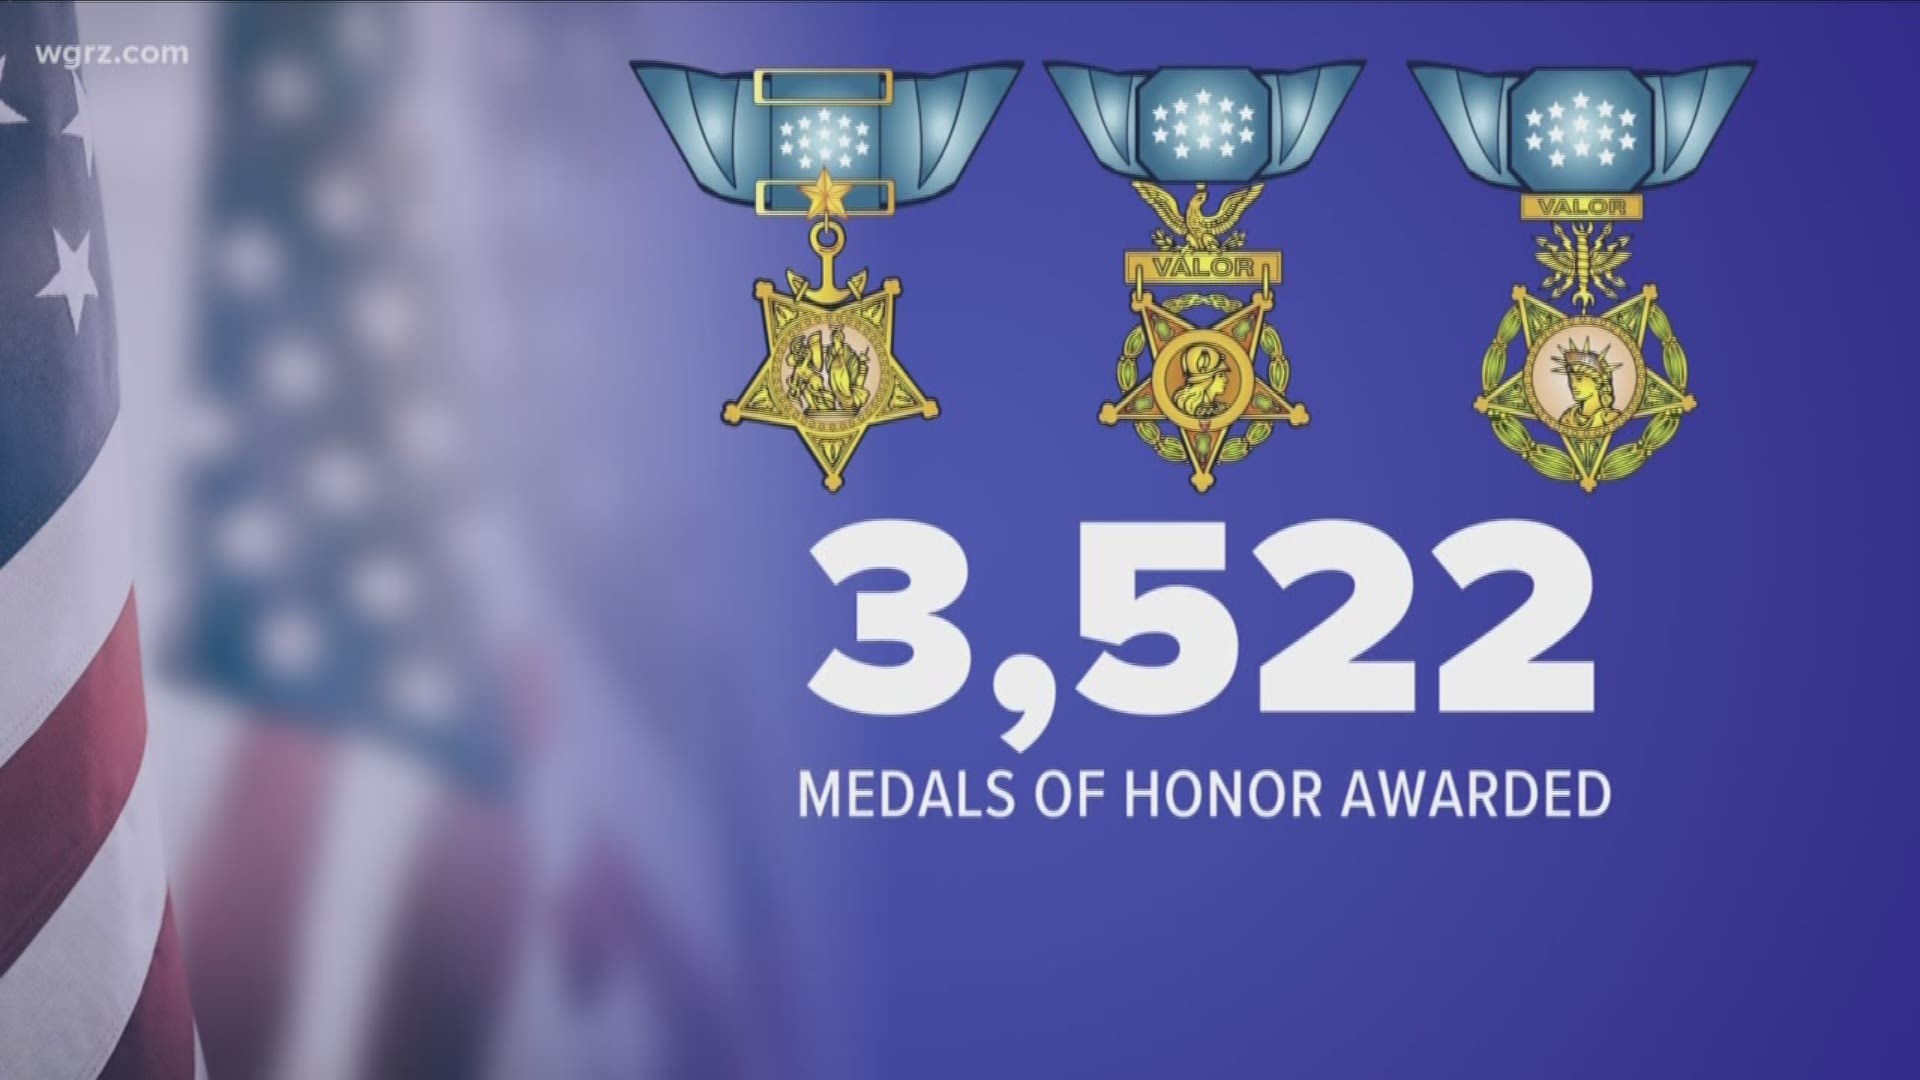 Michael Wooten takes a look at the history of the Medal of Honor.